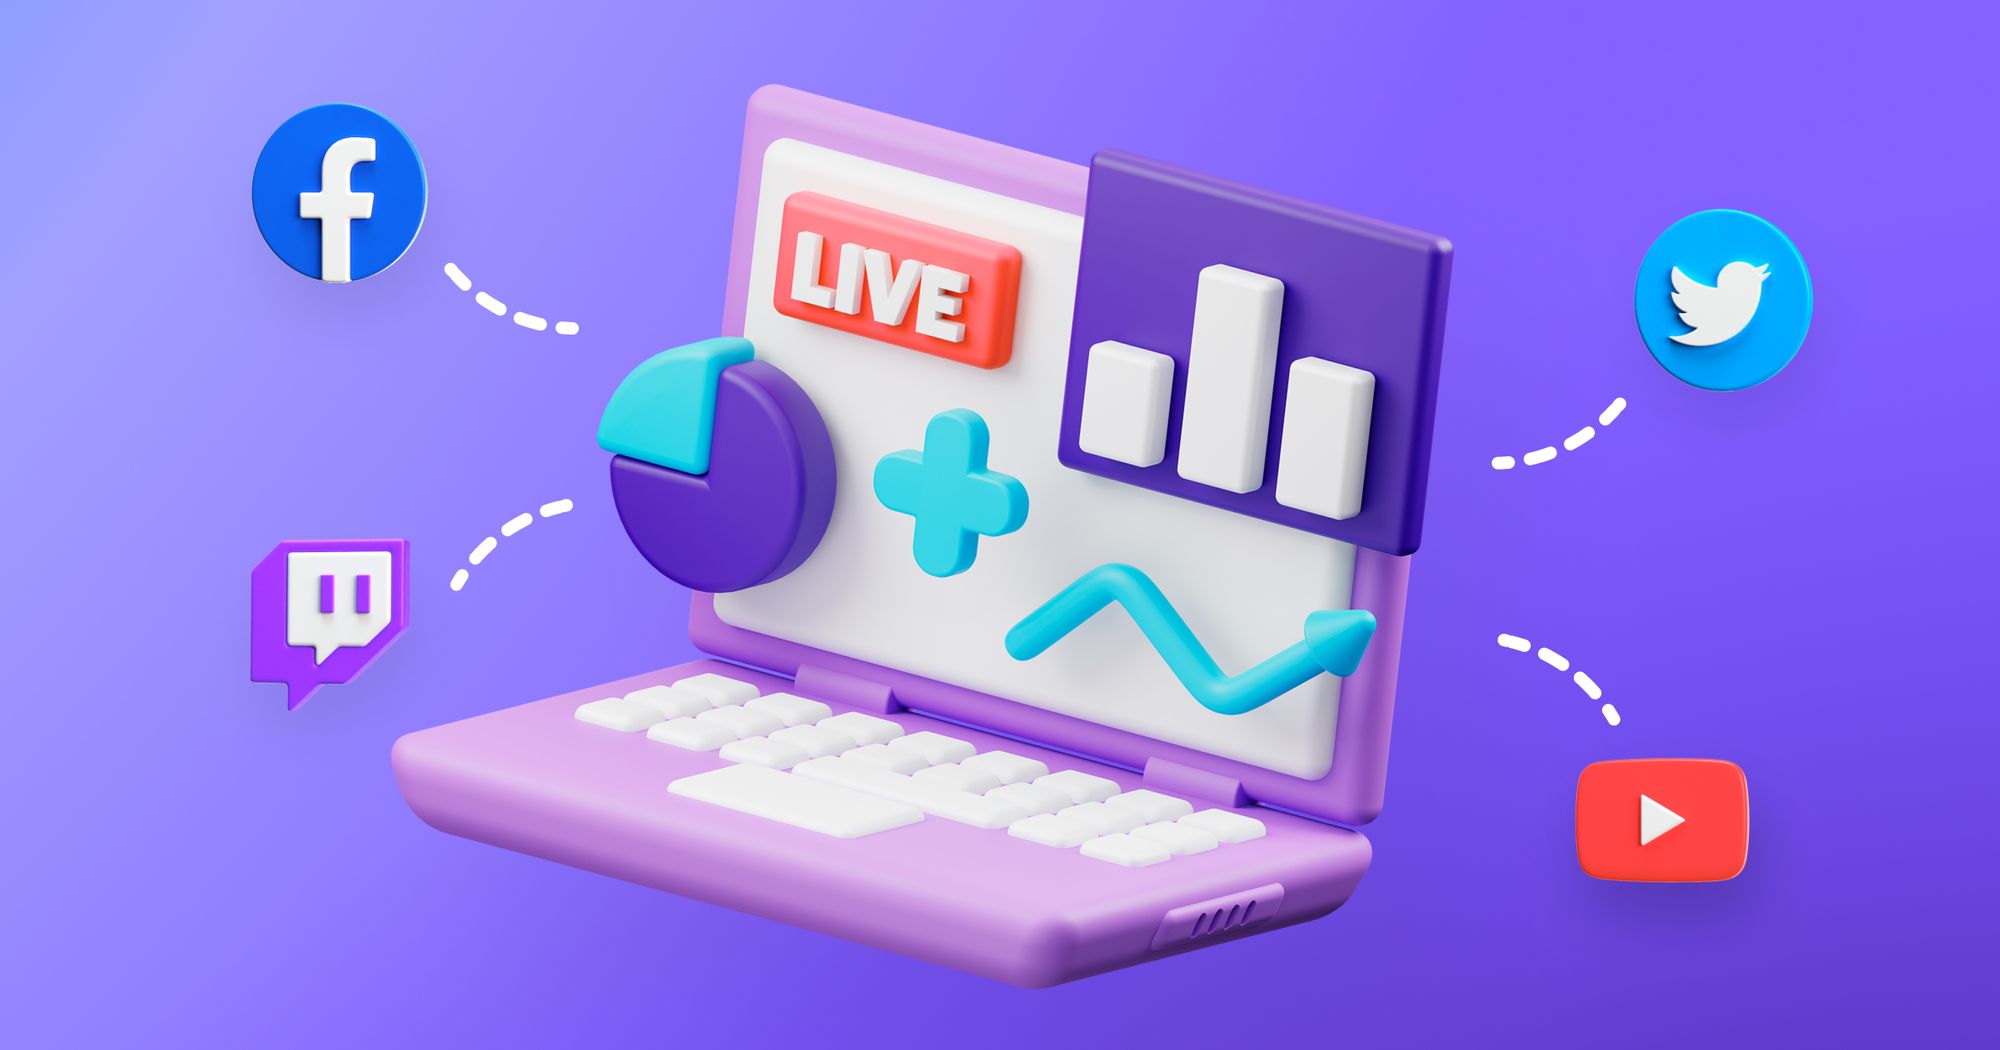 How to track live video engagement on socials